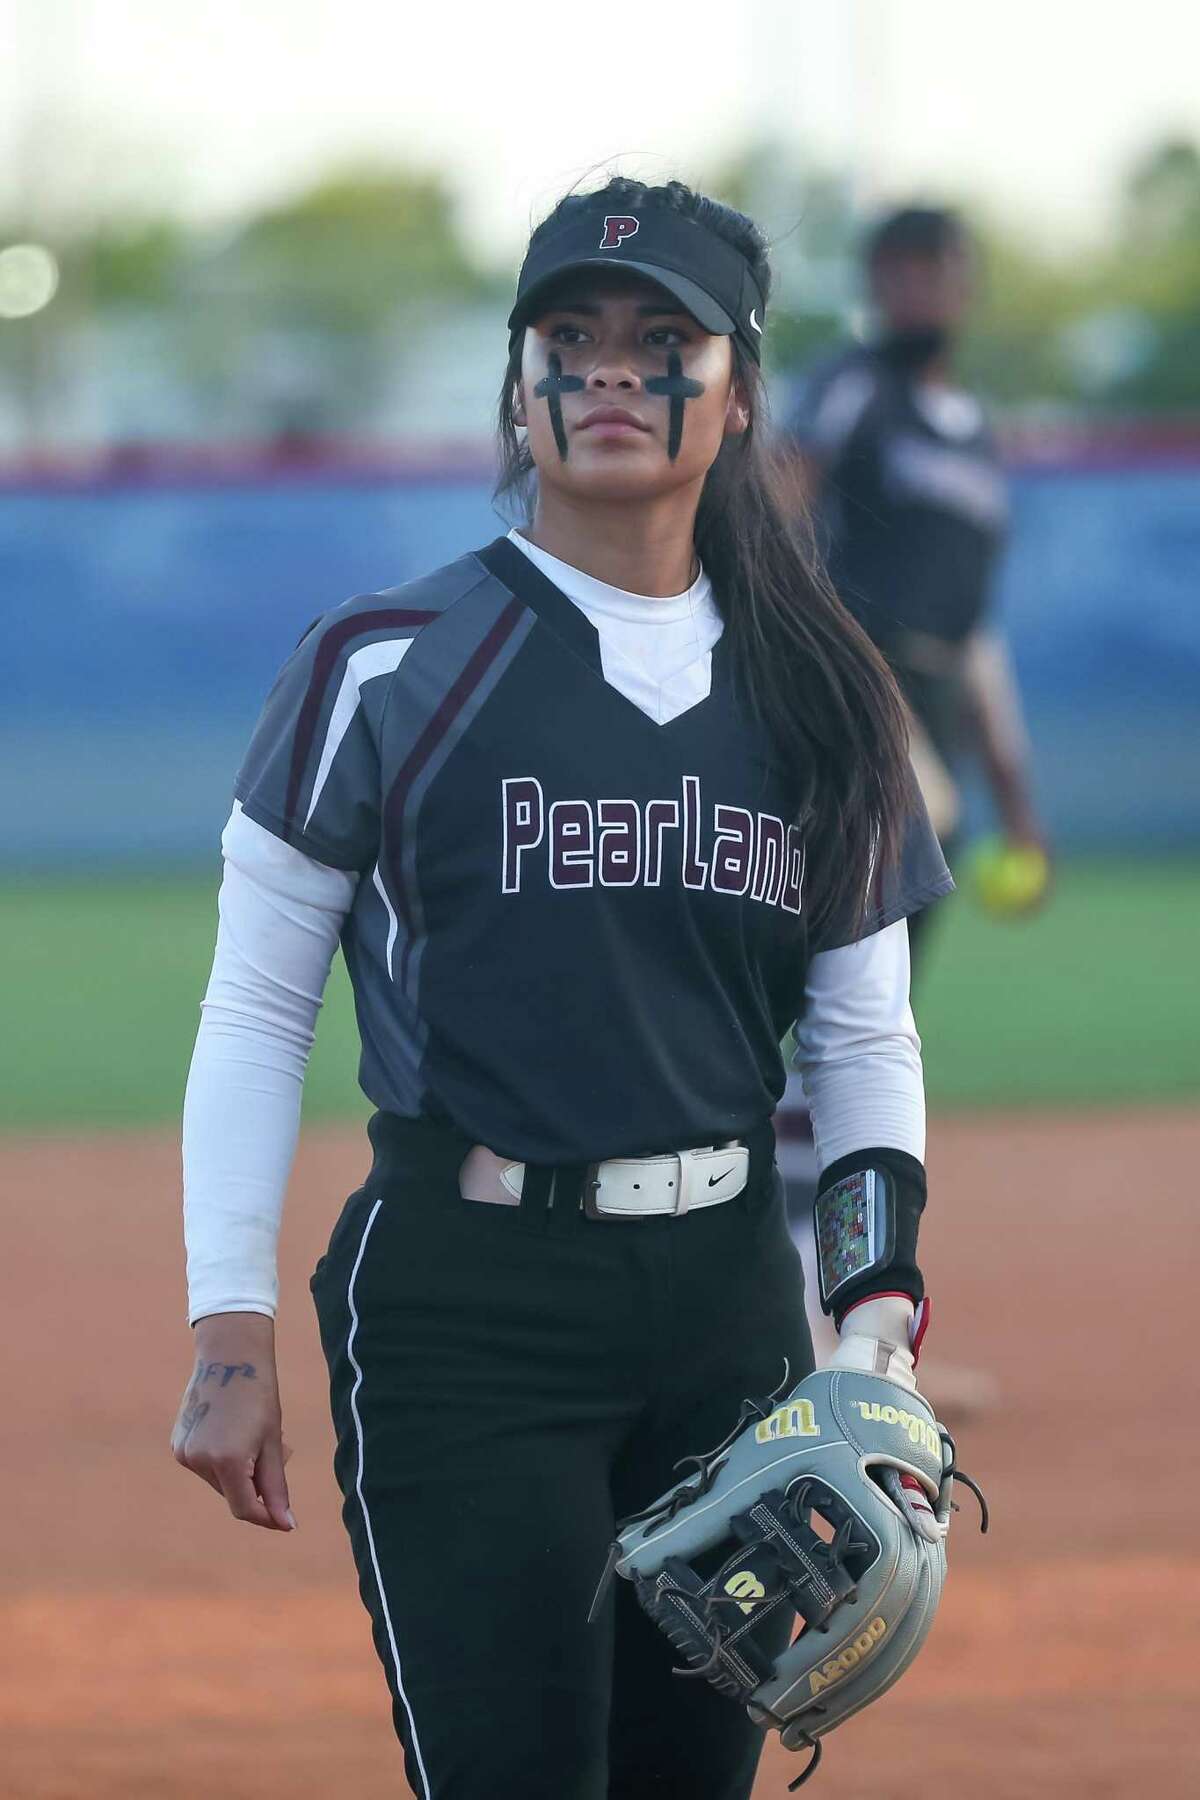 Pearland’s Raenna Liscano and the rest of the Lady Oilers will try to bounce back after falling to Deer Park, 7-5, Wednesday night in the opener of the Region 3-6A championship softball series. Game two is set for 7 p.m., Friday at the University of Houston.